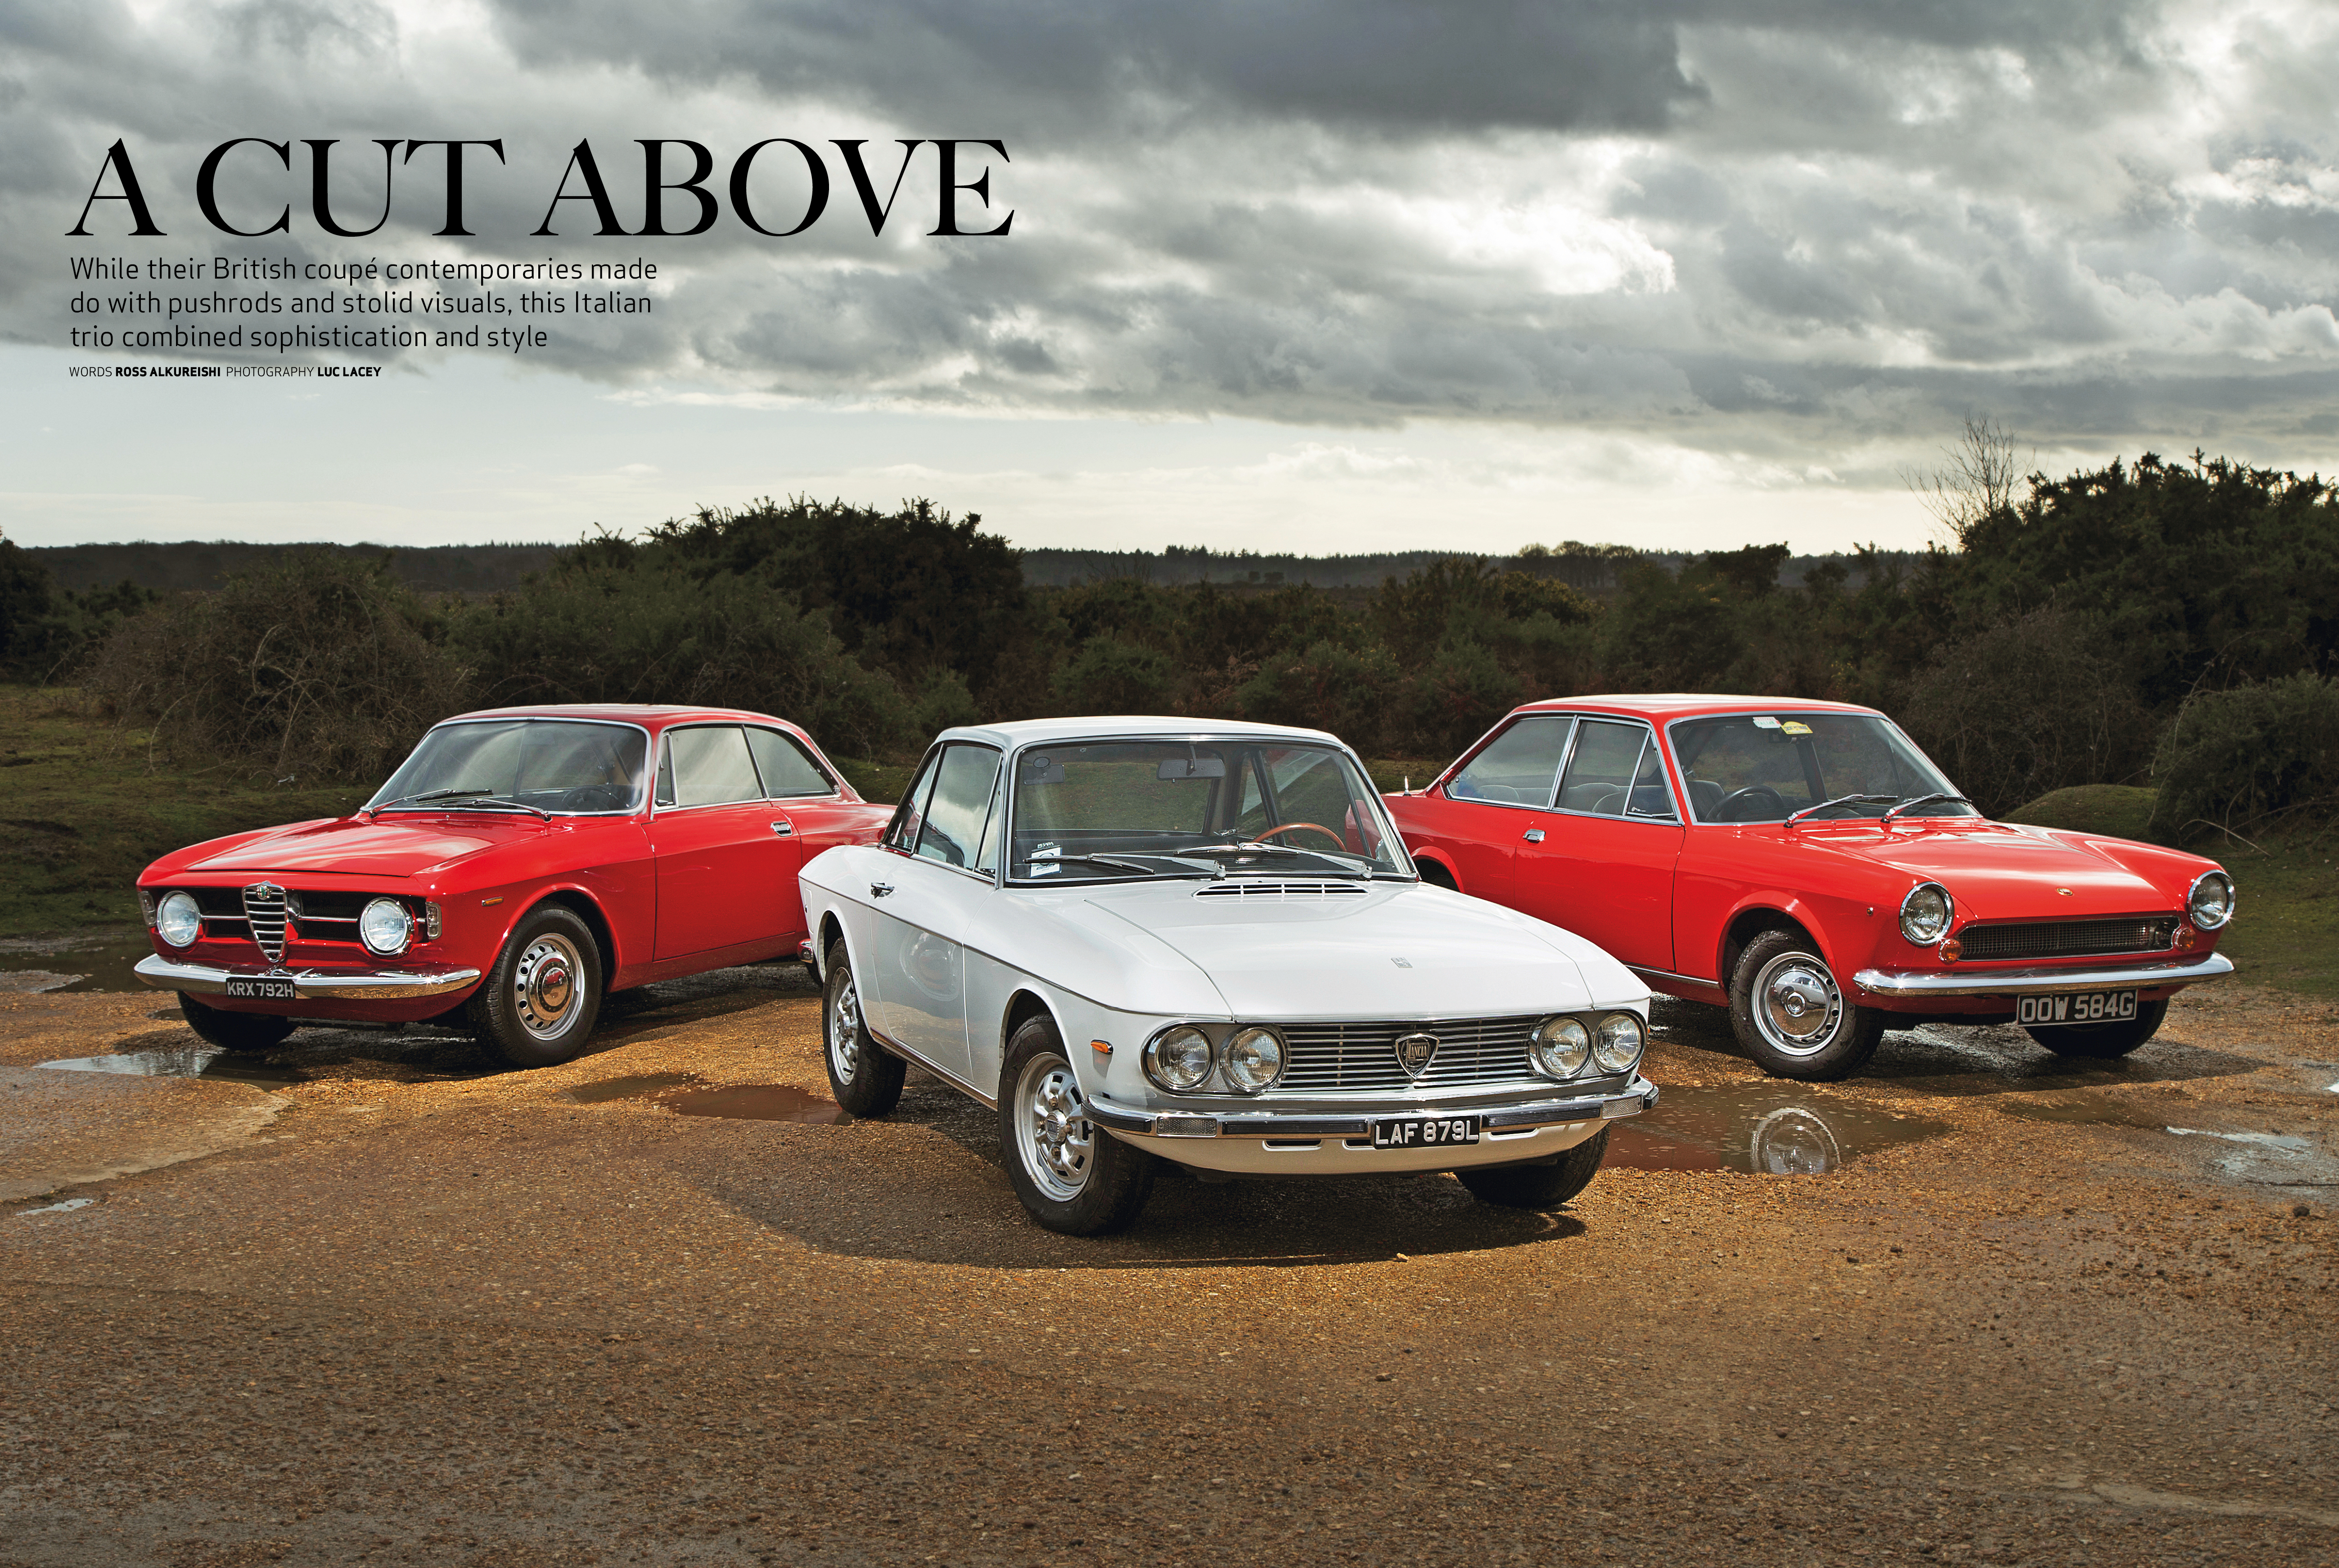 Classic & Sports Car – The forgotten baby Ferrari: Inside the August 2019 issue of C&SC